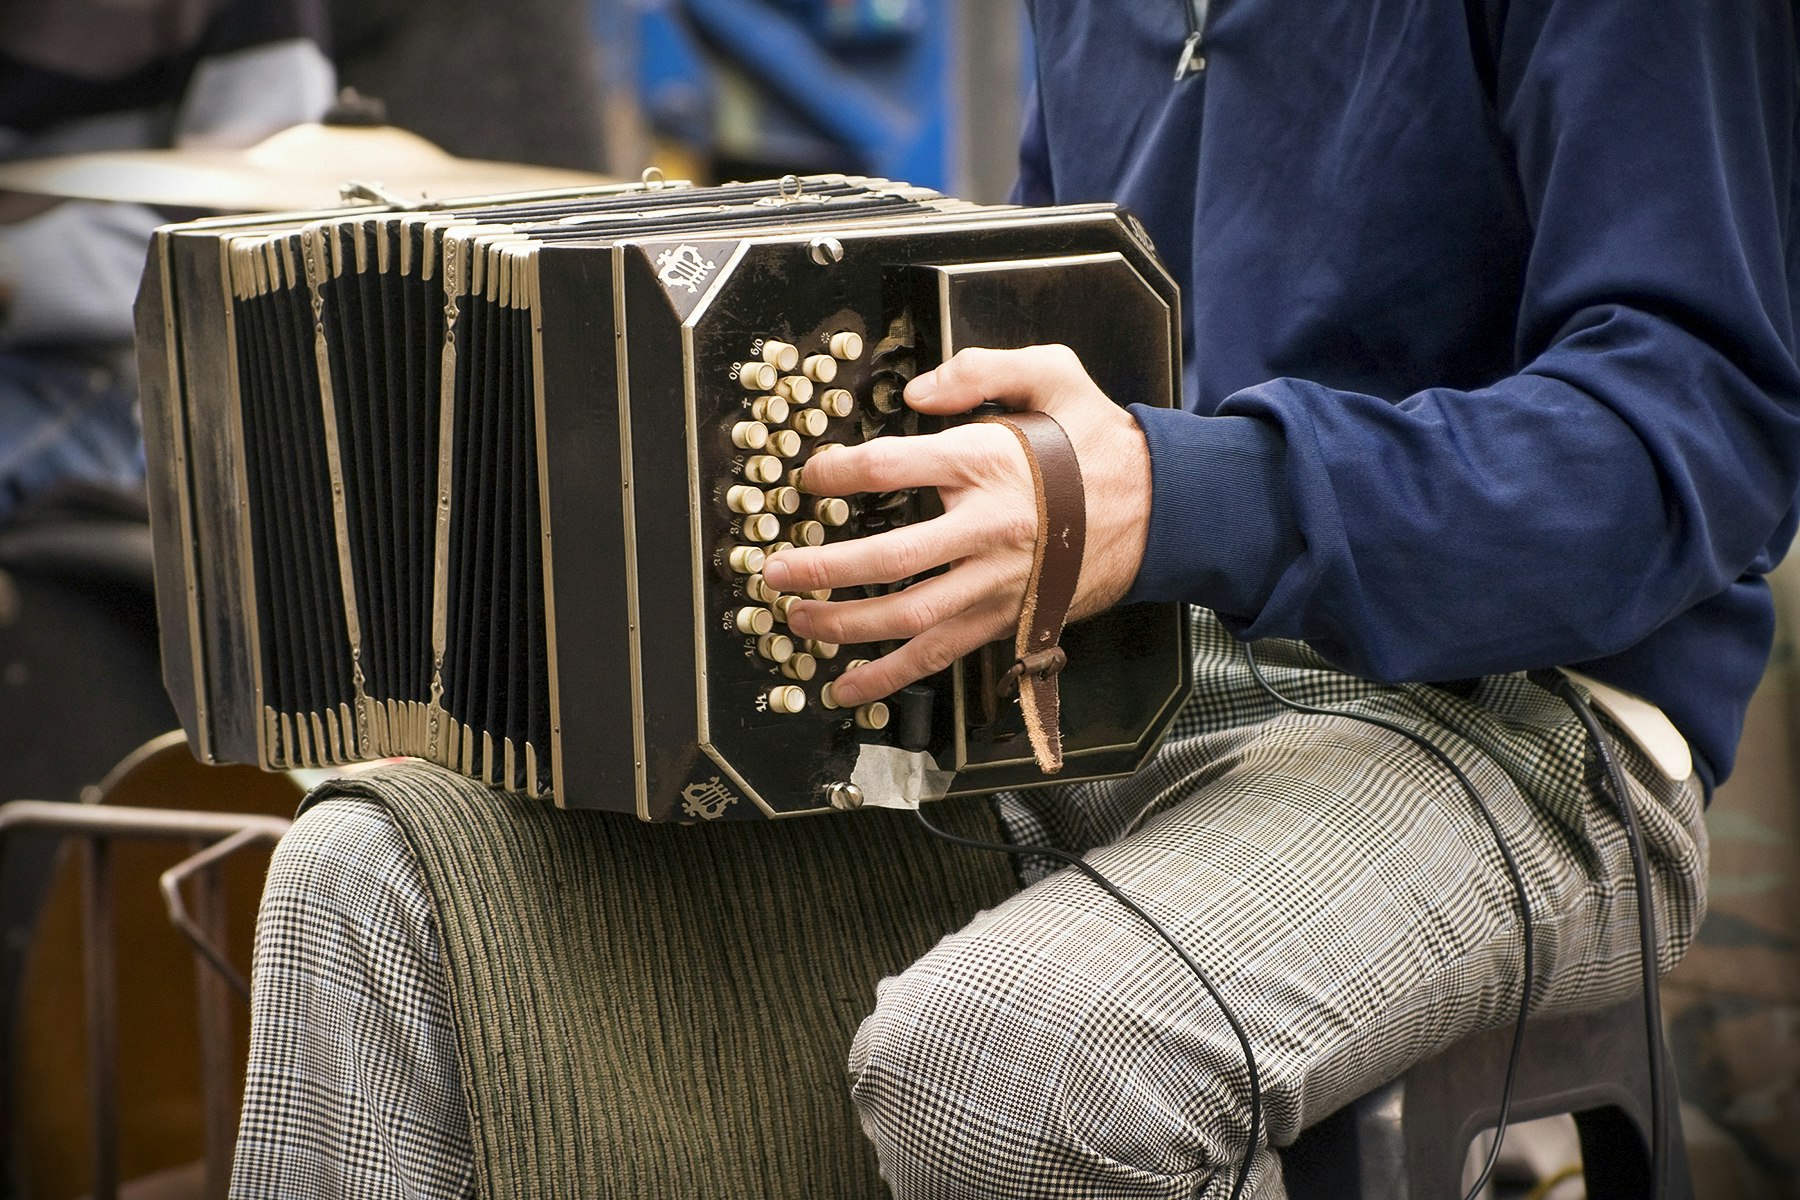 A close-up of a person playing an accordion on their knee in Buenos Aires